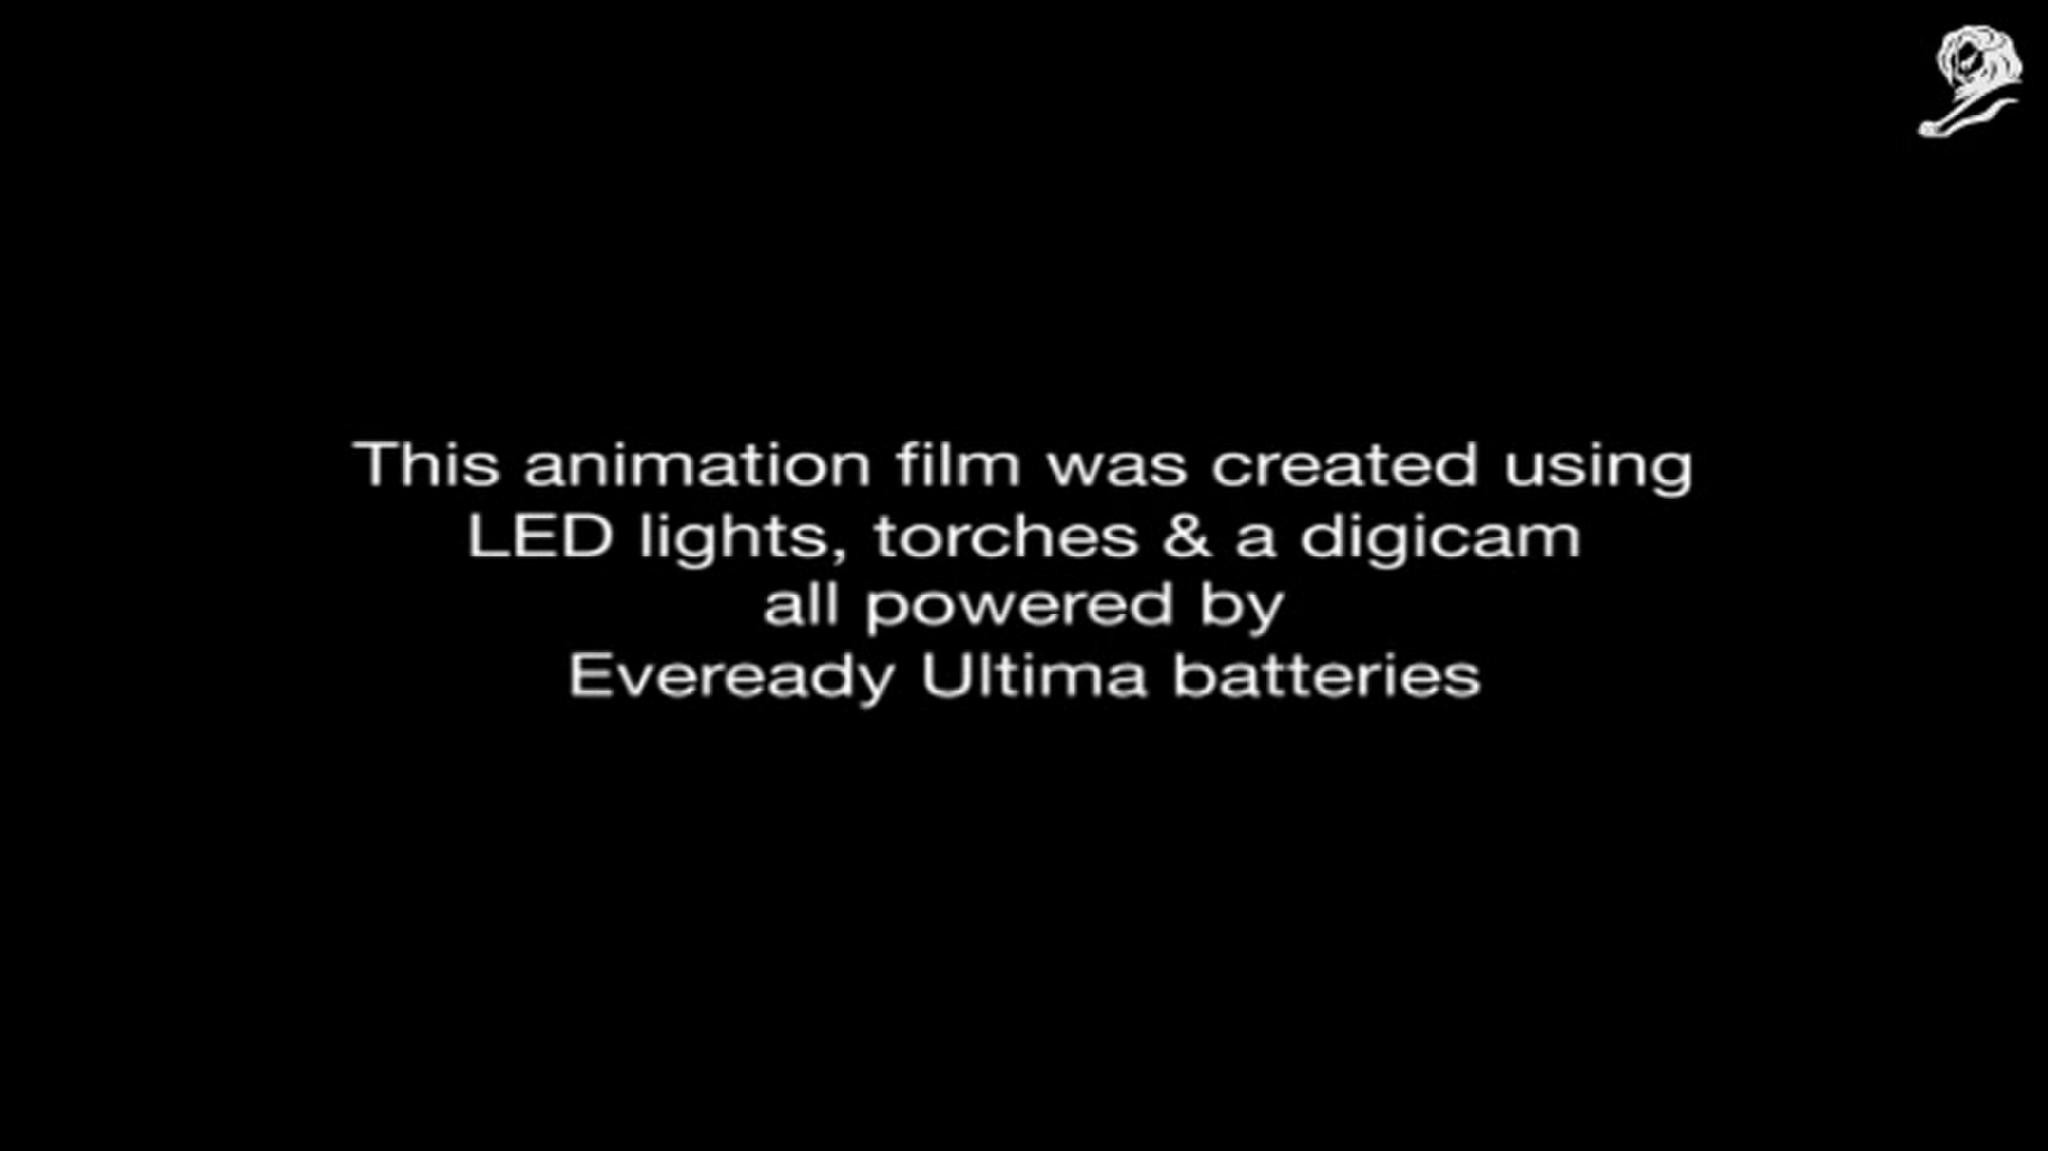 EVEREADY ULTIMA BATTERIES